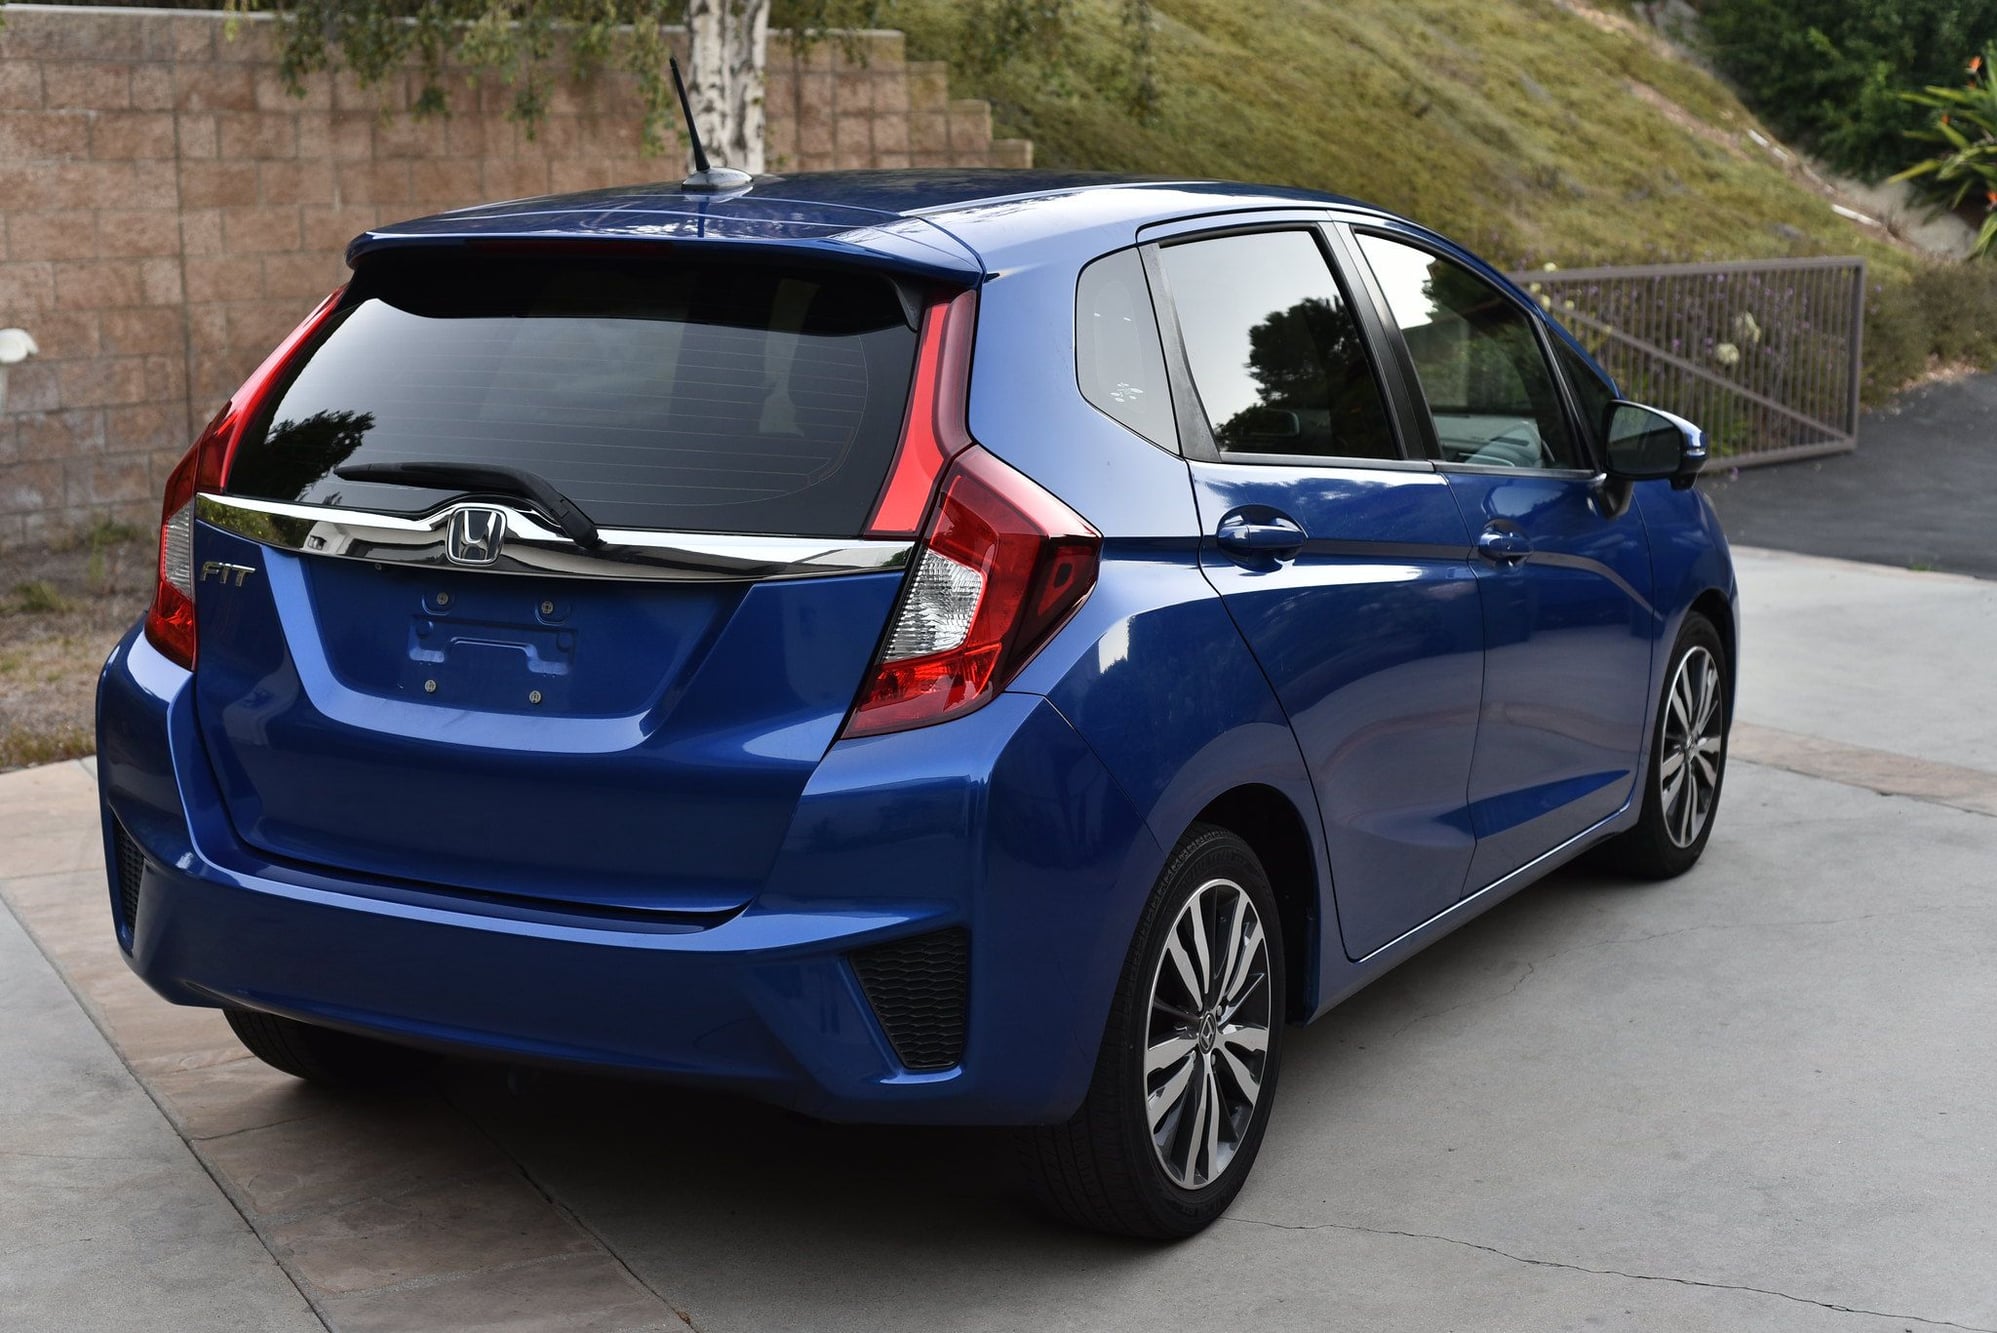 2015 Honda Fit - 2015 Honda Fit EX-LN | 2nd Owner | Great Condition | Los Angeles - Used - VIN 3HGGK5H8XFM747676 - 107,700 Miles - 4 cyl - 2WD - Automatic - Hatchback - Blue - Rancho Palos Verdes, CA 90275, United States